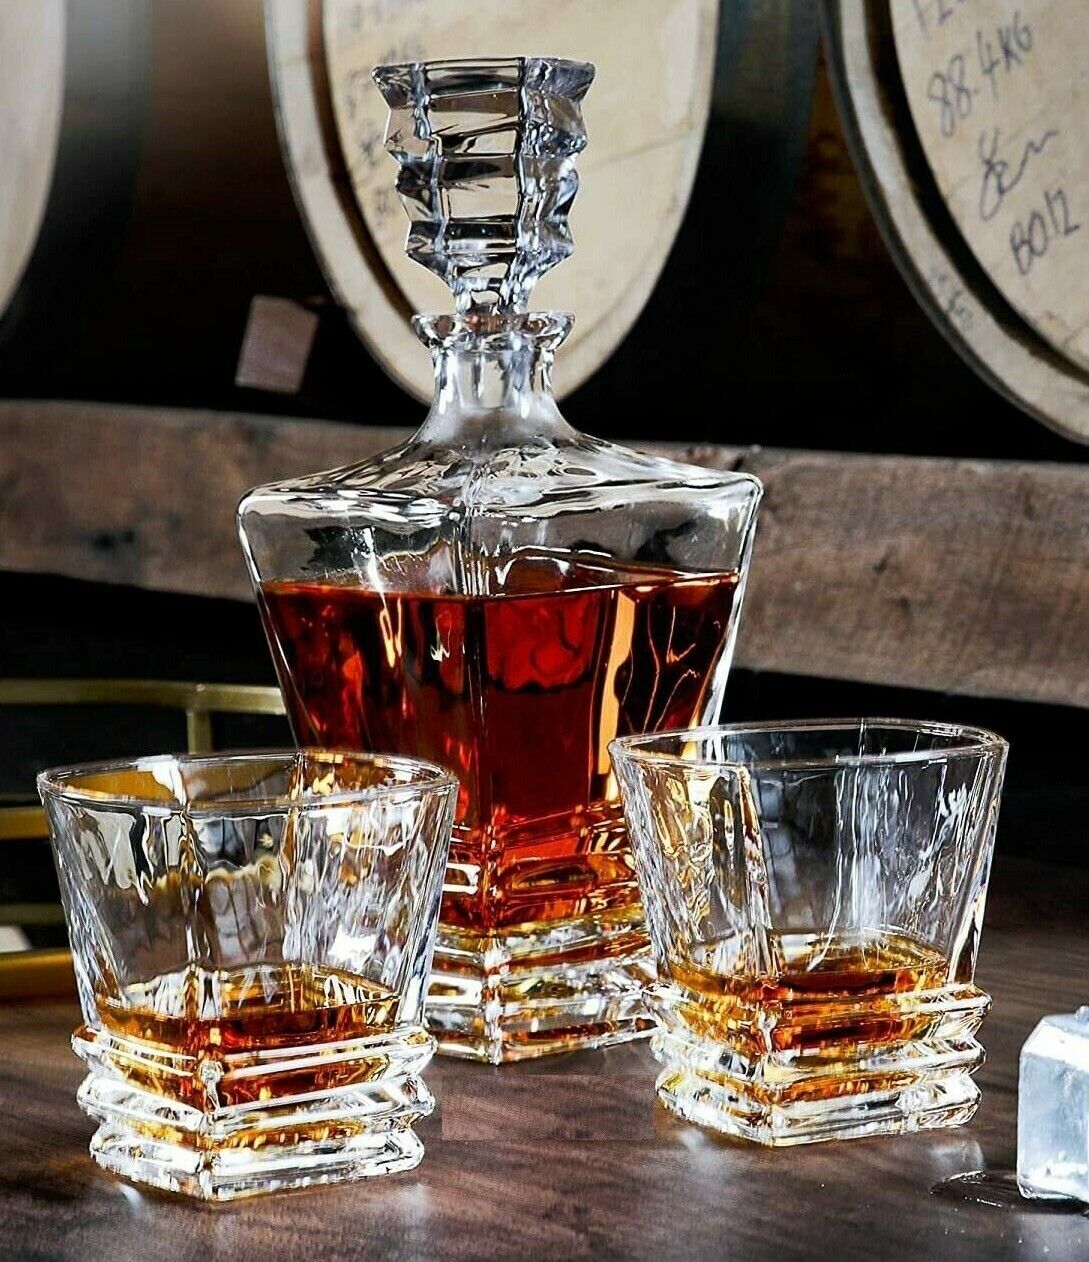 European Glass Decanters with 6 Glasses for Alcohol Scotch Whisky Bourbon Cognac